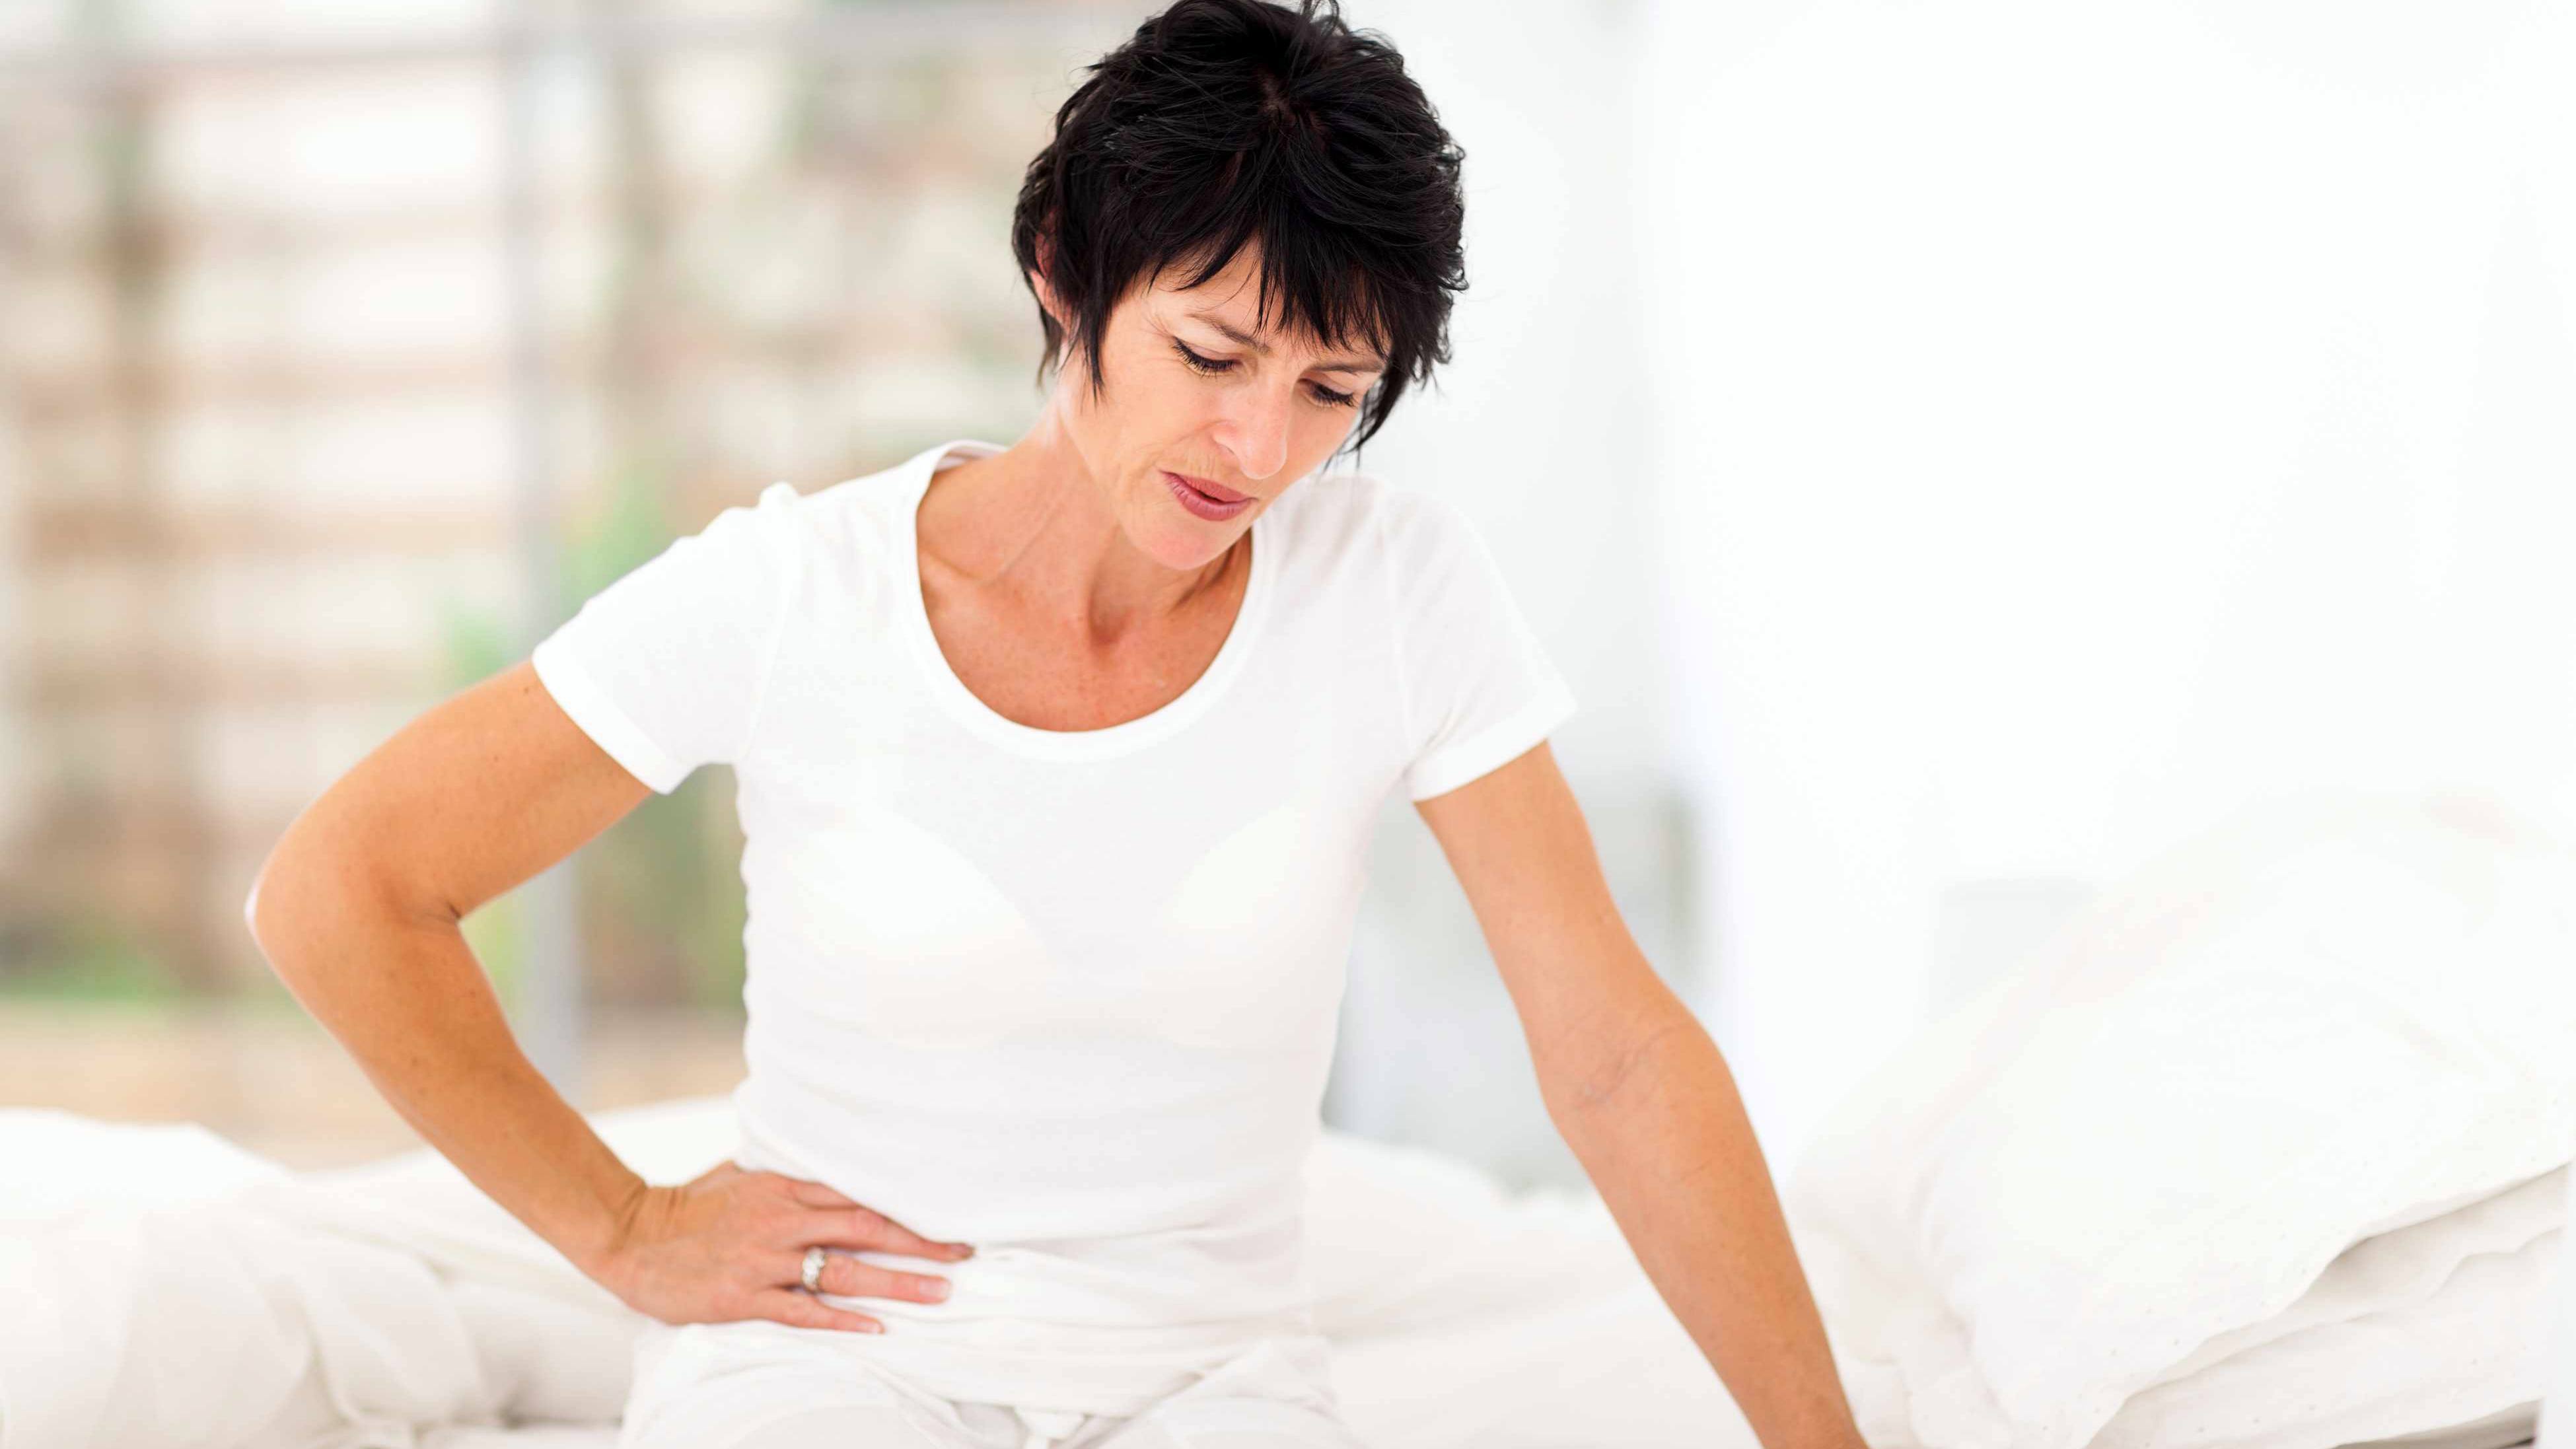 woman having stomach aches, cramps and pain - menstruation